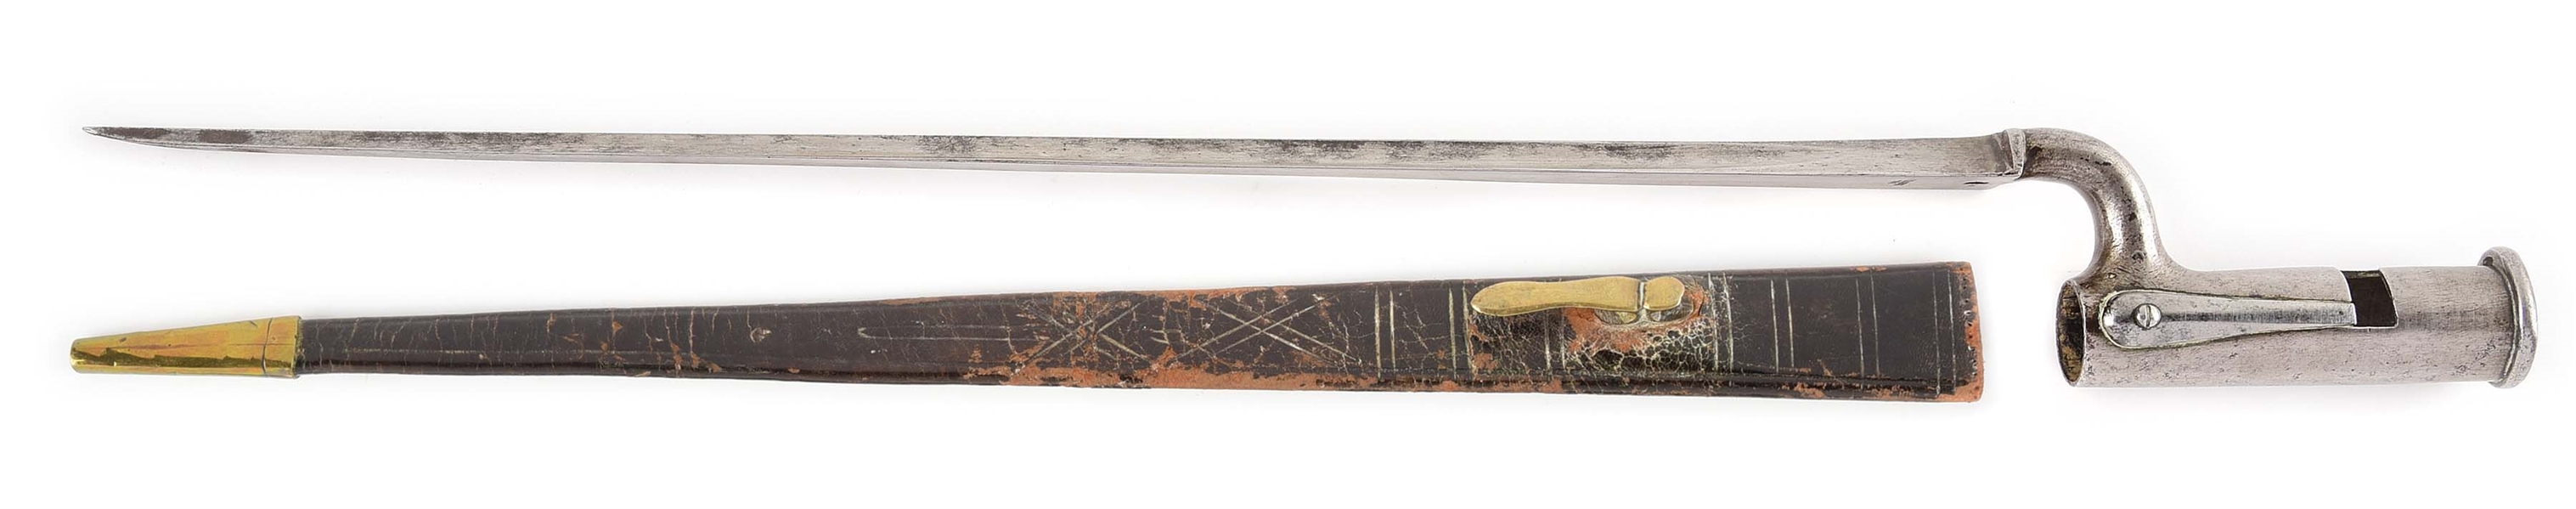 RARE LAND PATTERN BAYONET WITH SPRING CATCH AND ORIGINAL SCABBARD, C. 1768